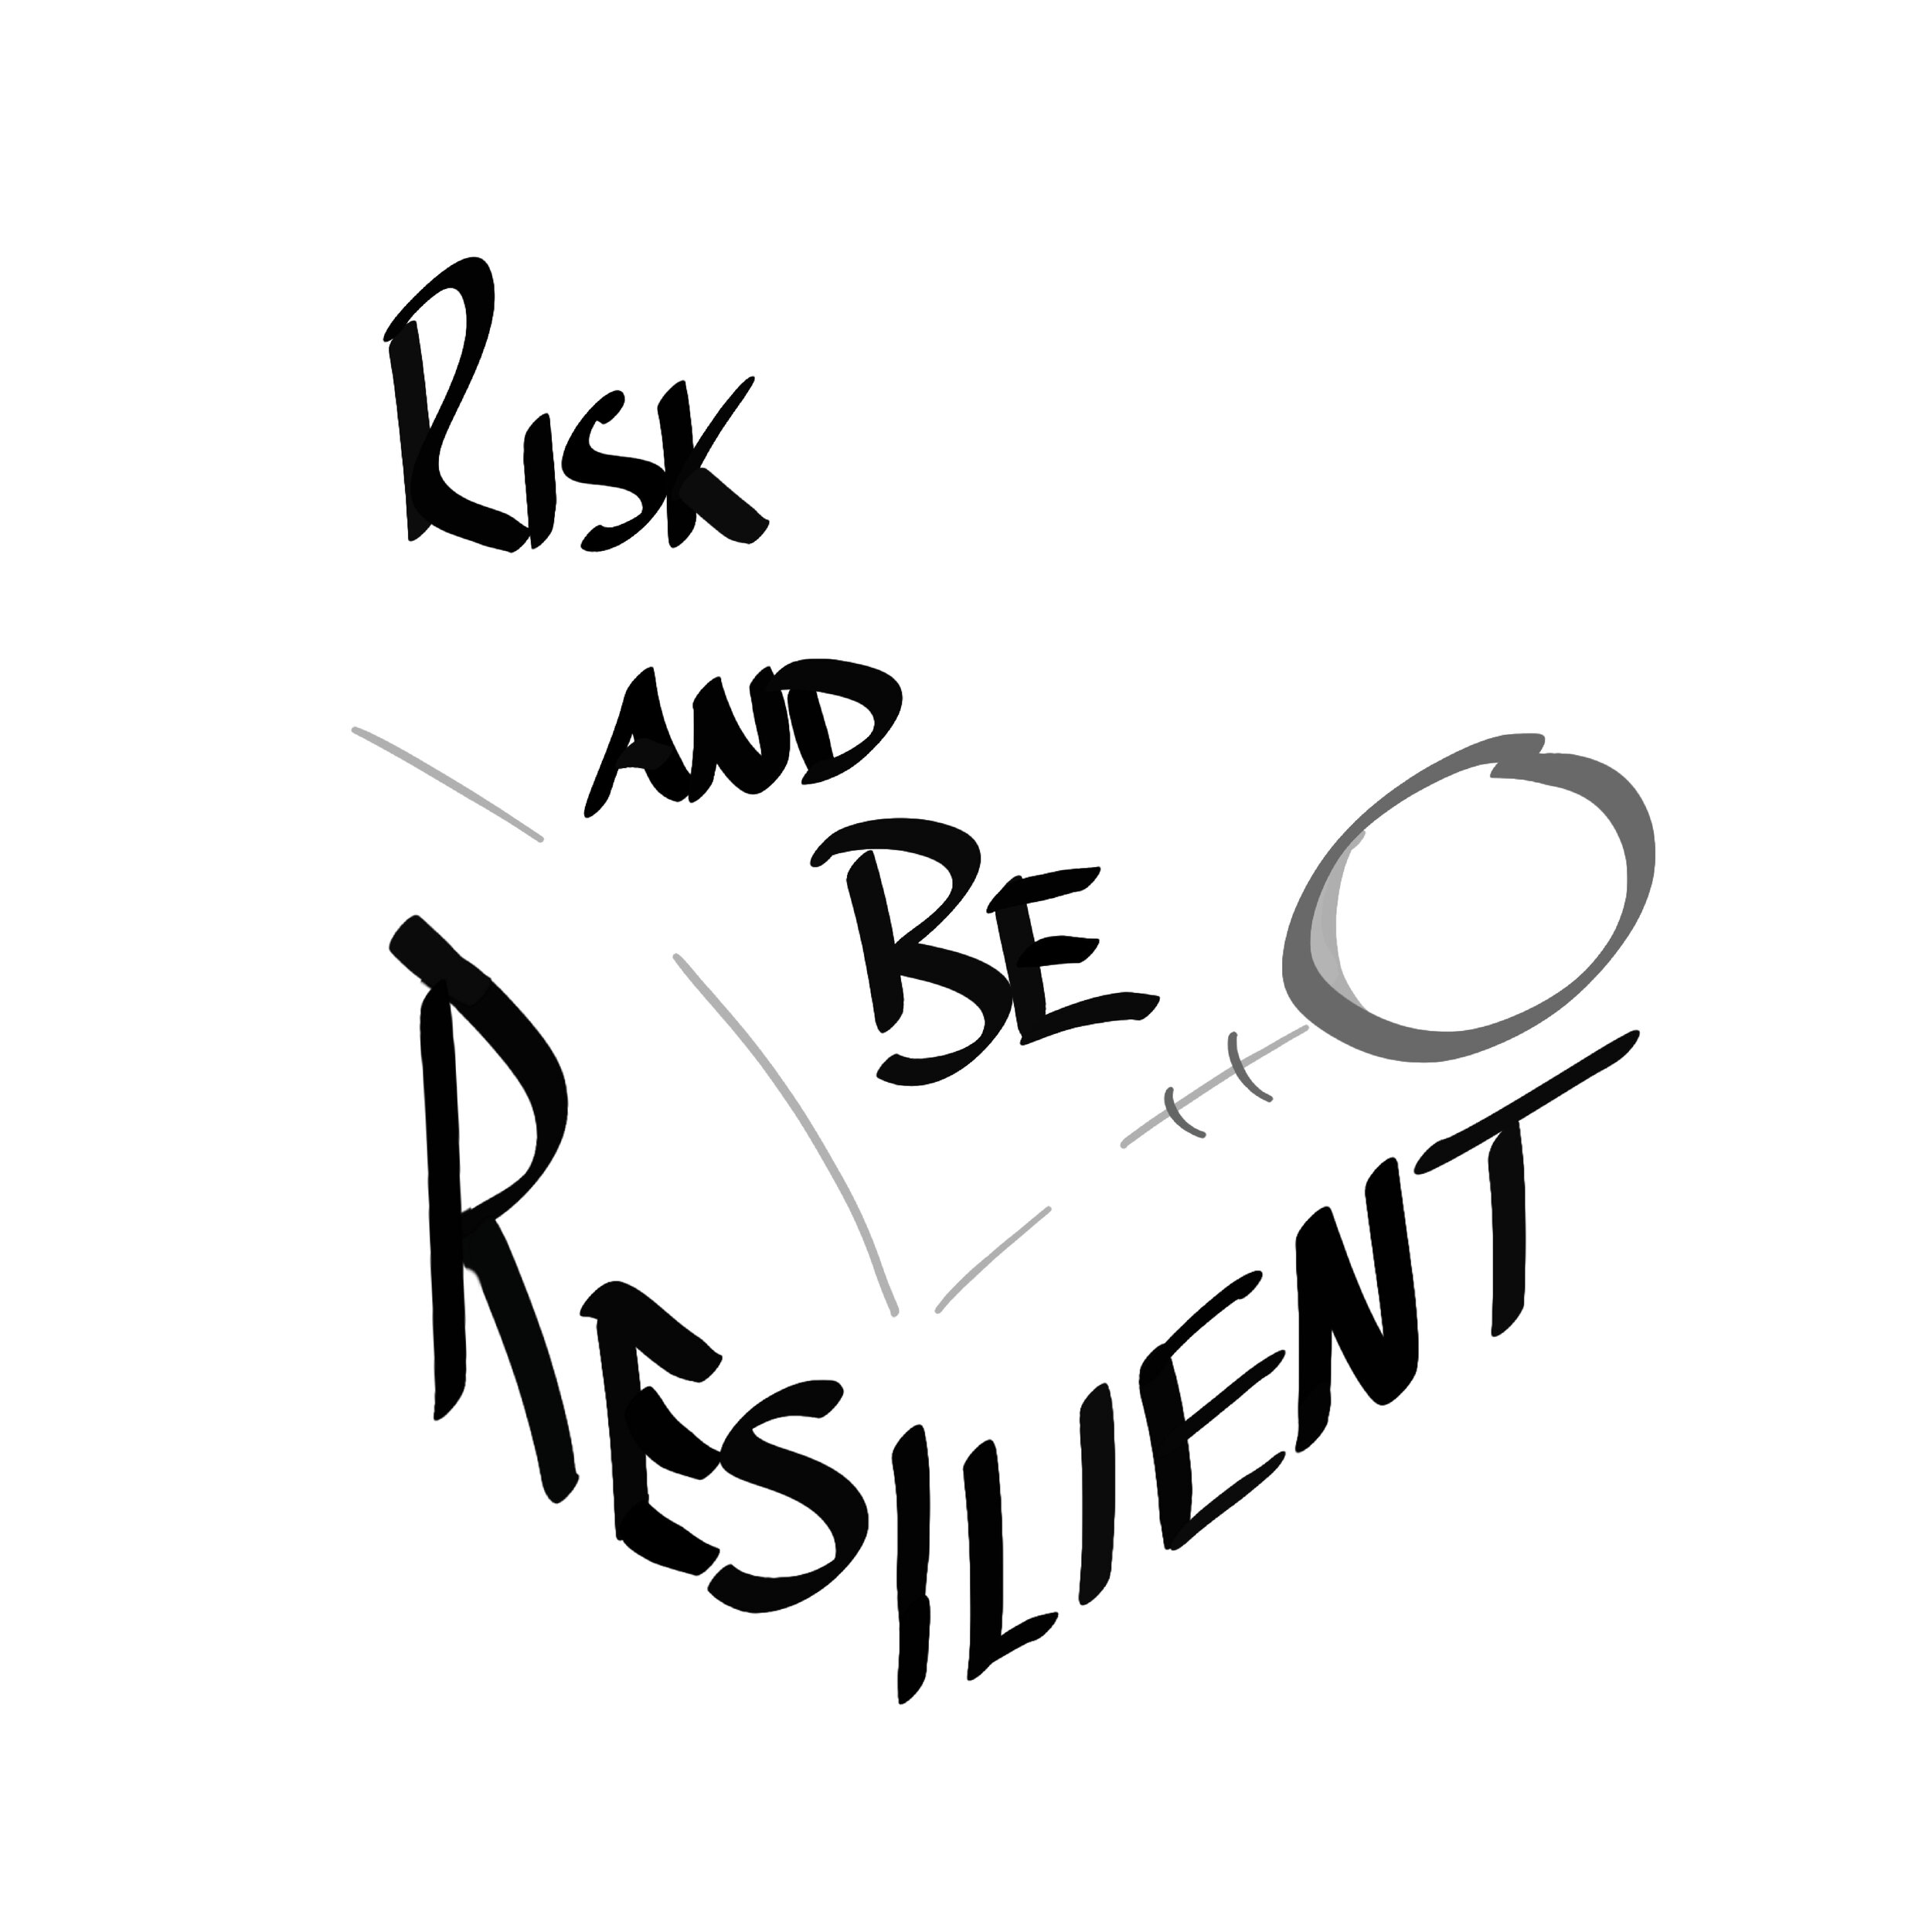 Risk and be resilient (1).jpg